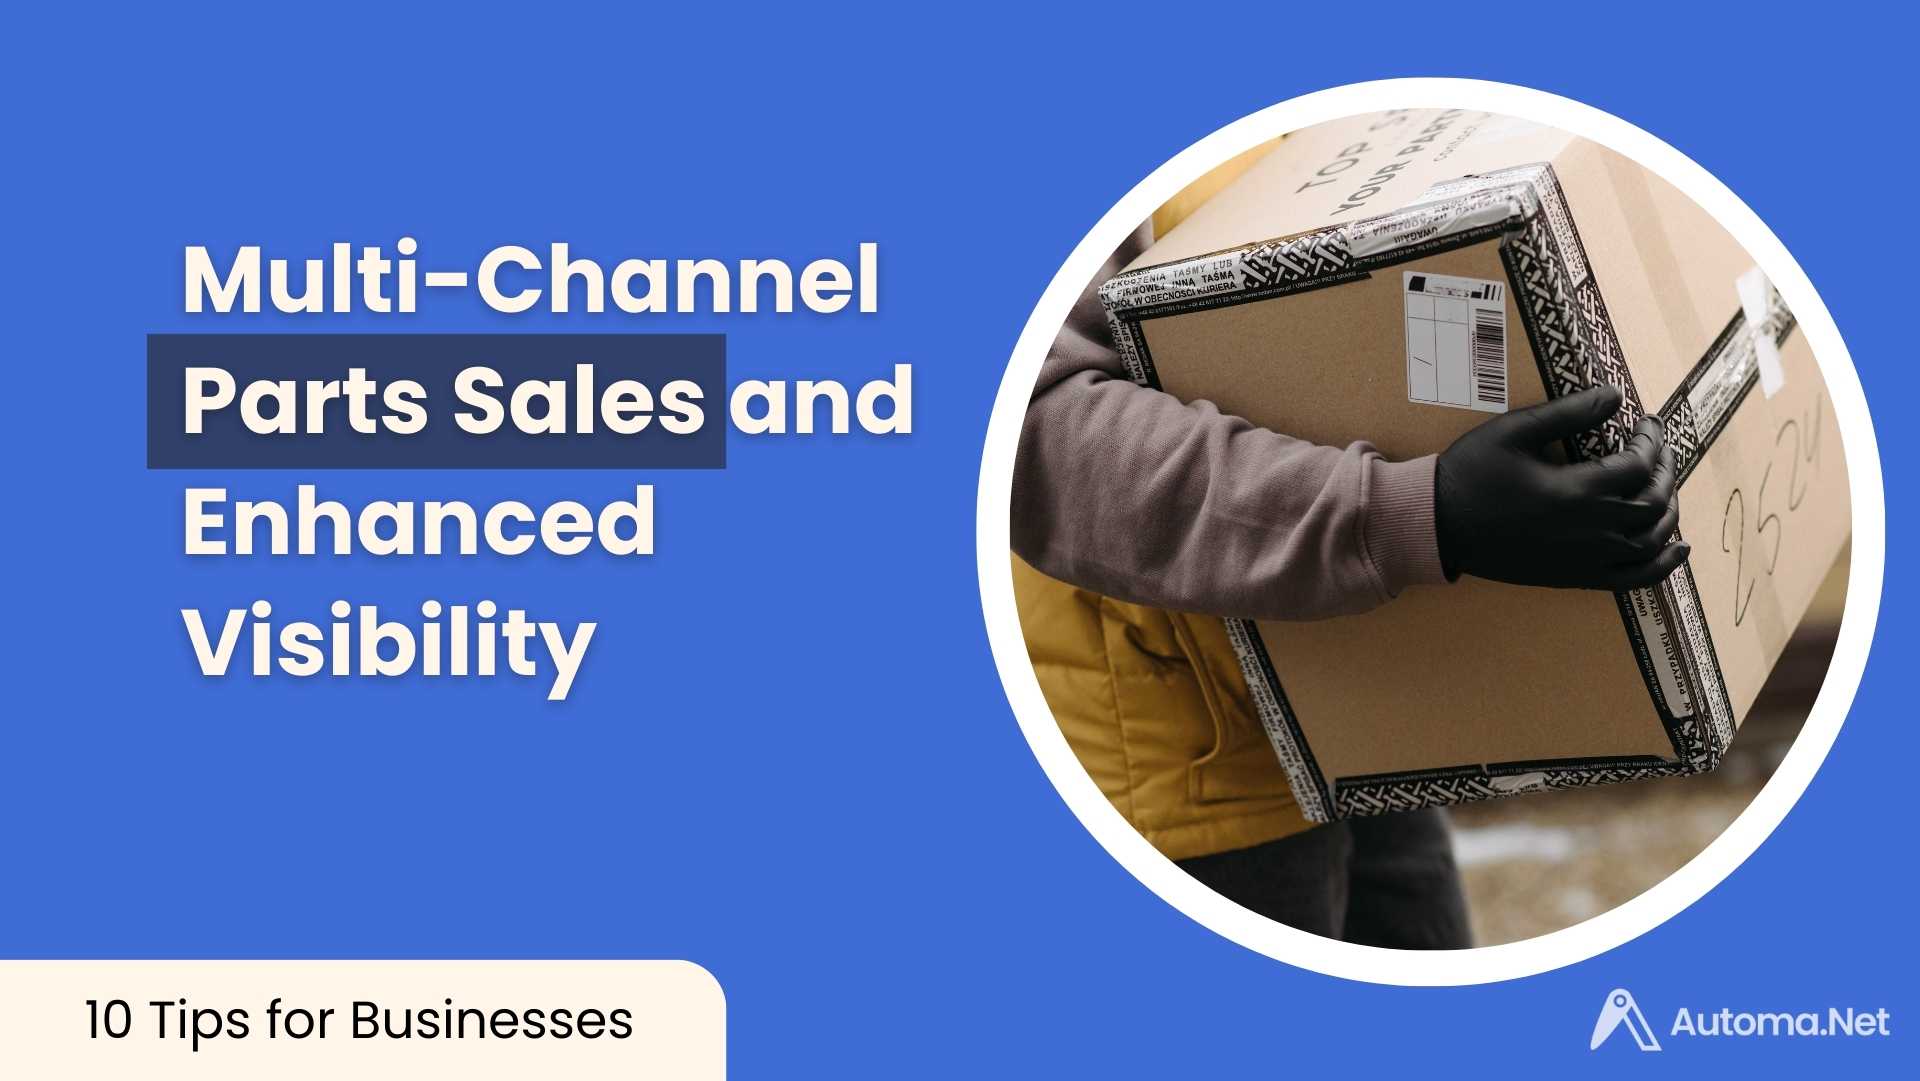 Multi Channel Parts Sales and Enhanced Visibility for automation businesses